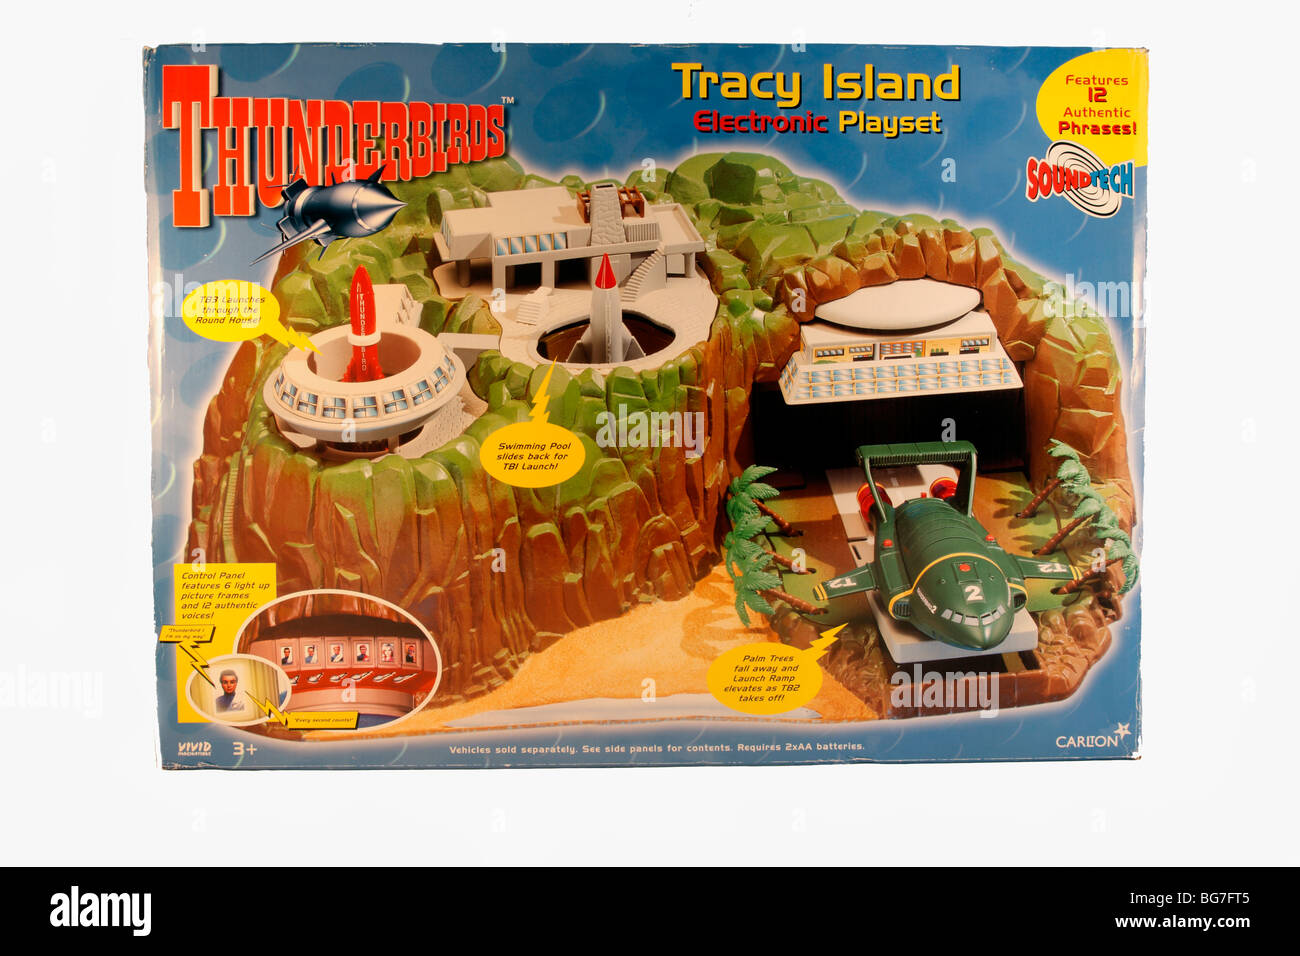 tracy-island-electronic-play-set-the-re-issue-of-the-original-tracy-BG7FT5.jpg